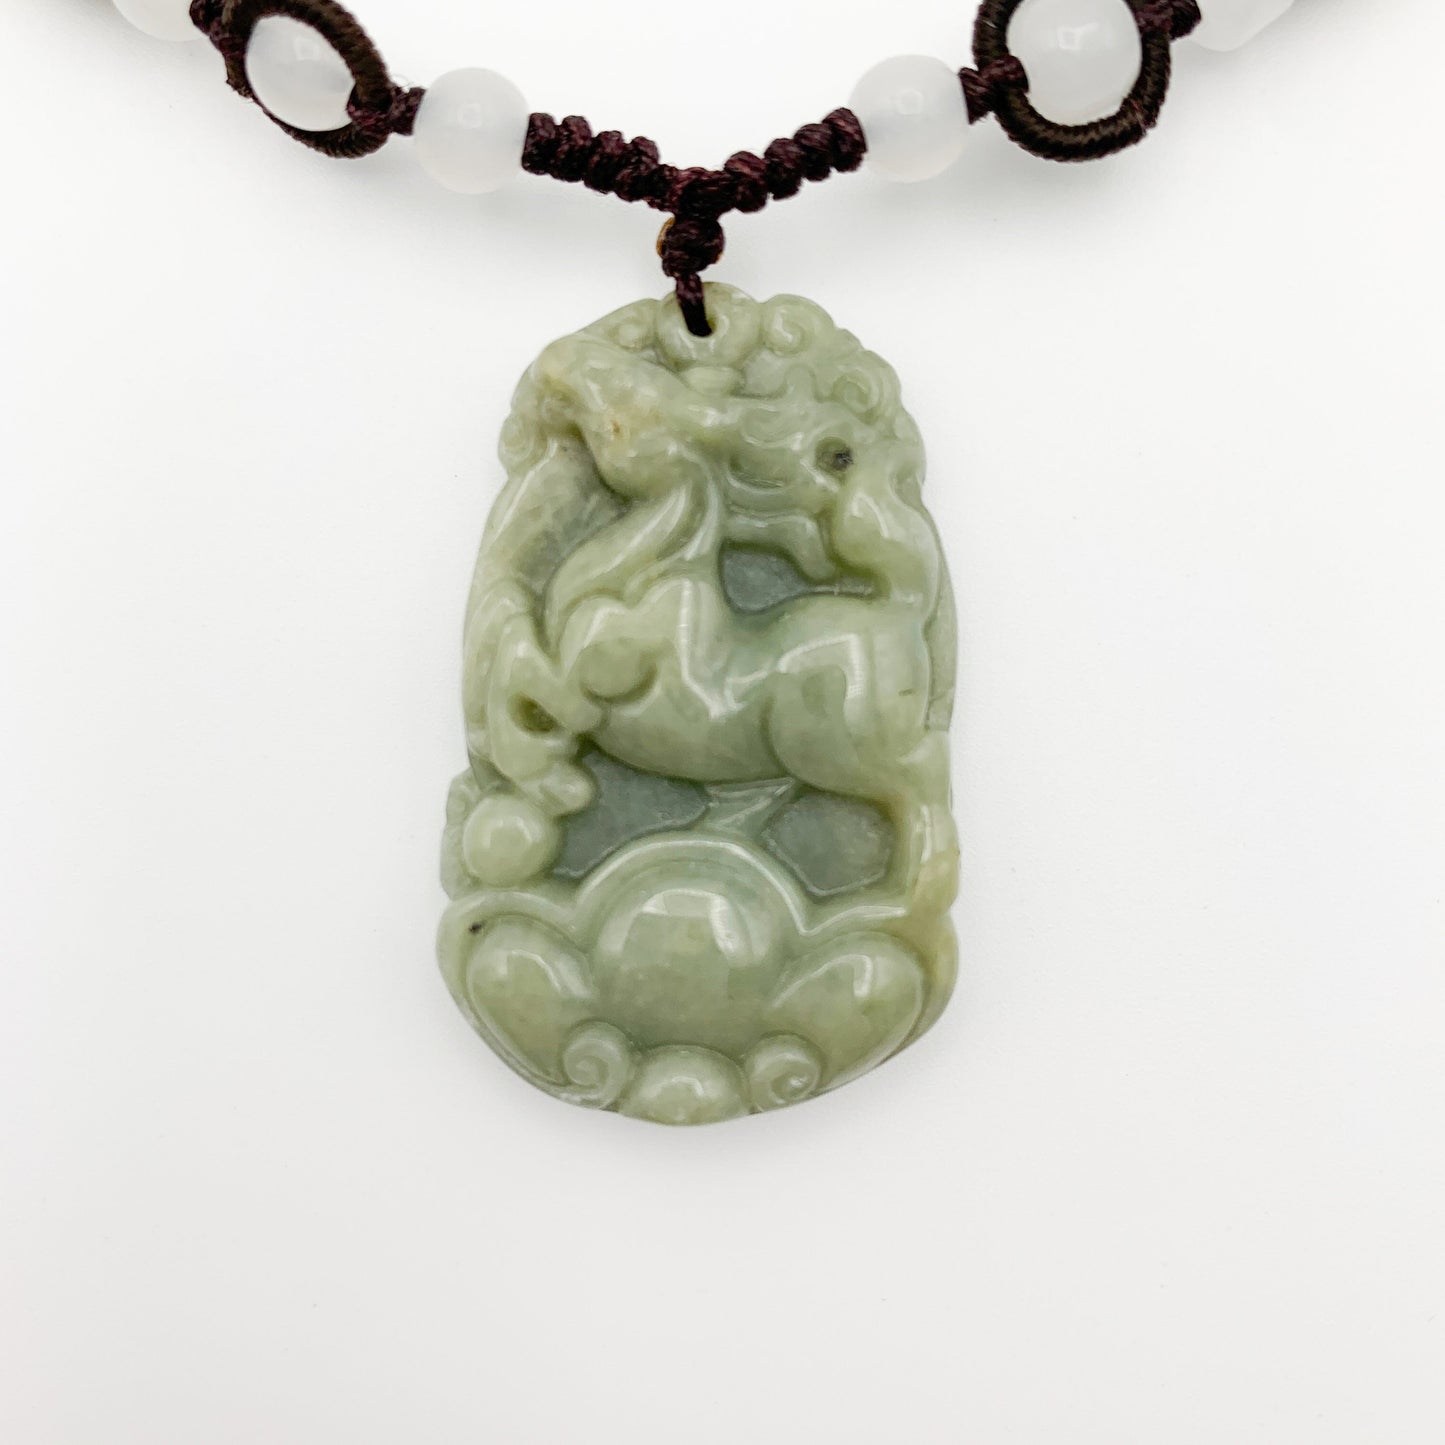 Horse Jadeite Chinese Zodiac Rustic Carved Pendant Necklace, YW-0110-1646804274 - AriaDesignCollection